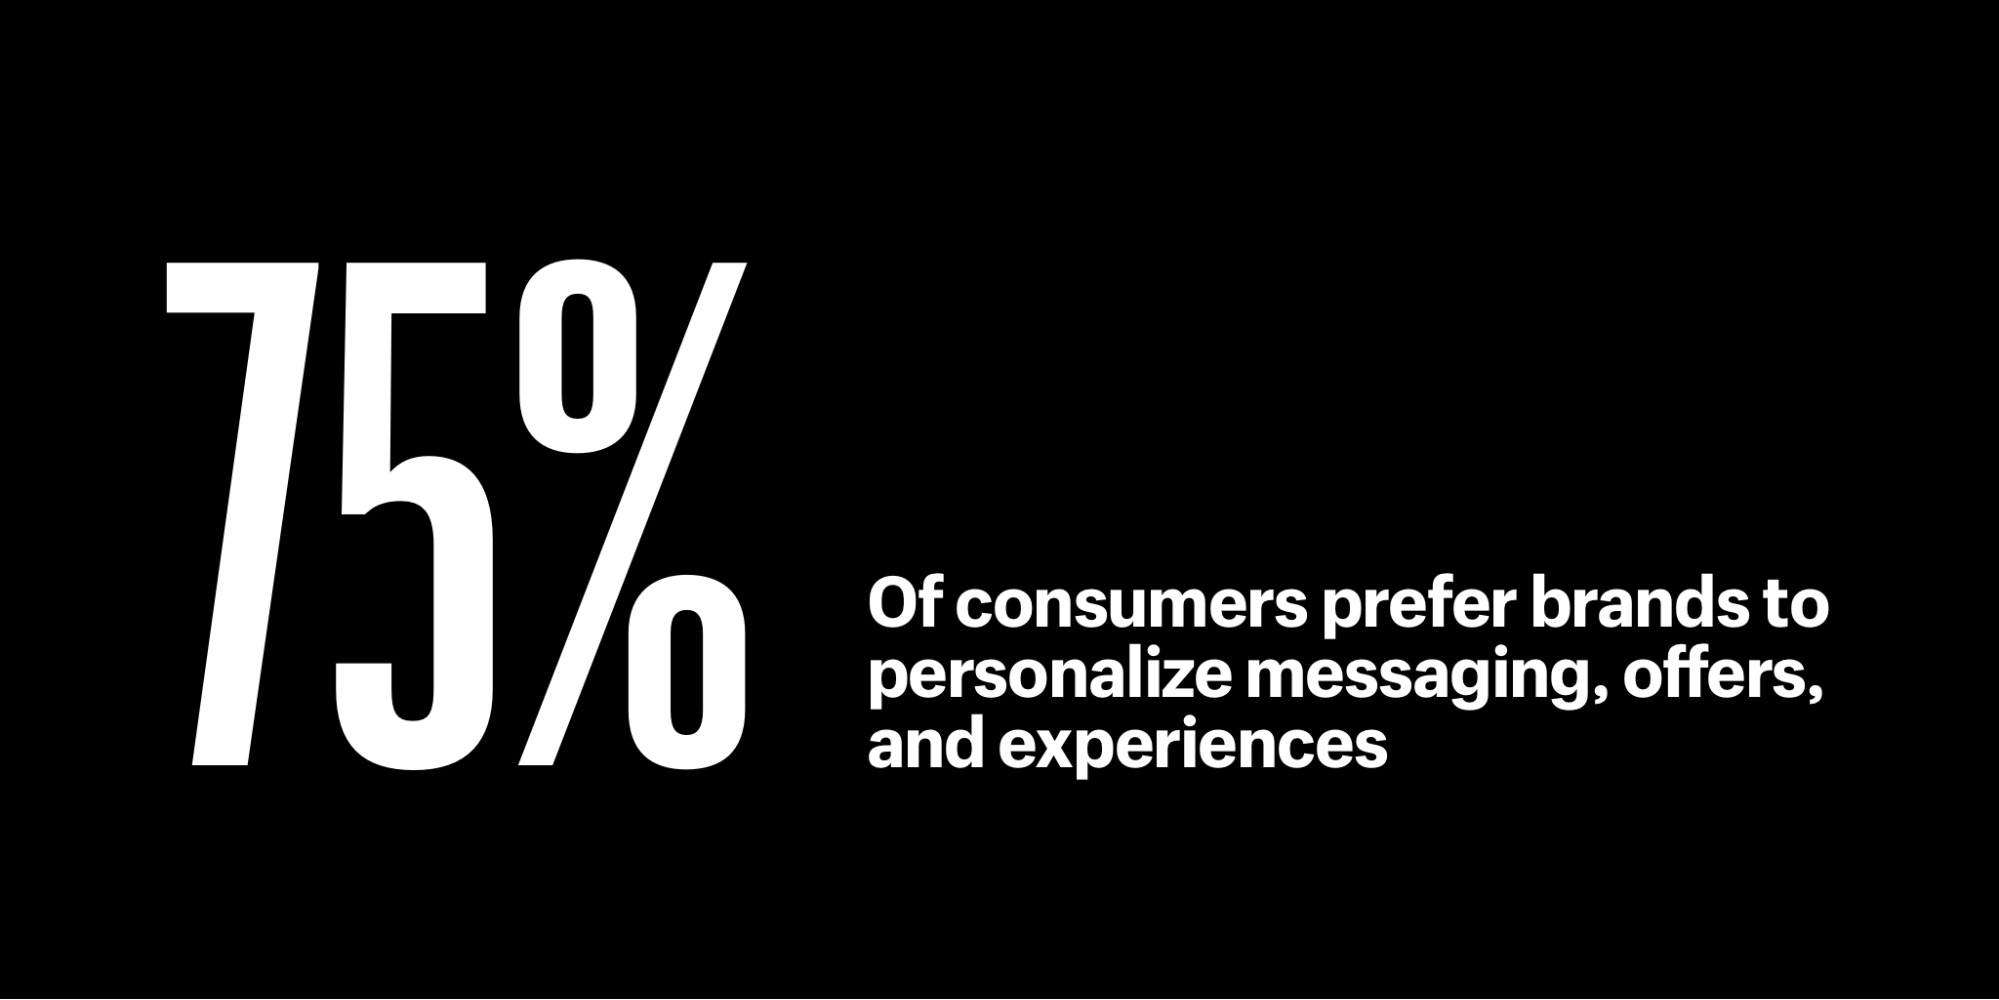 75% of consumers prefer brands to personalize messaging, offers, and experiences